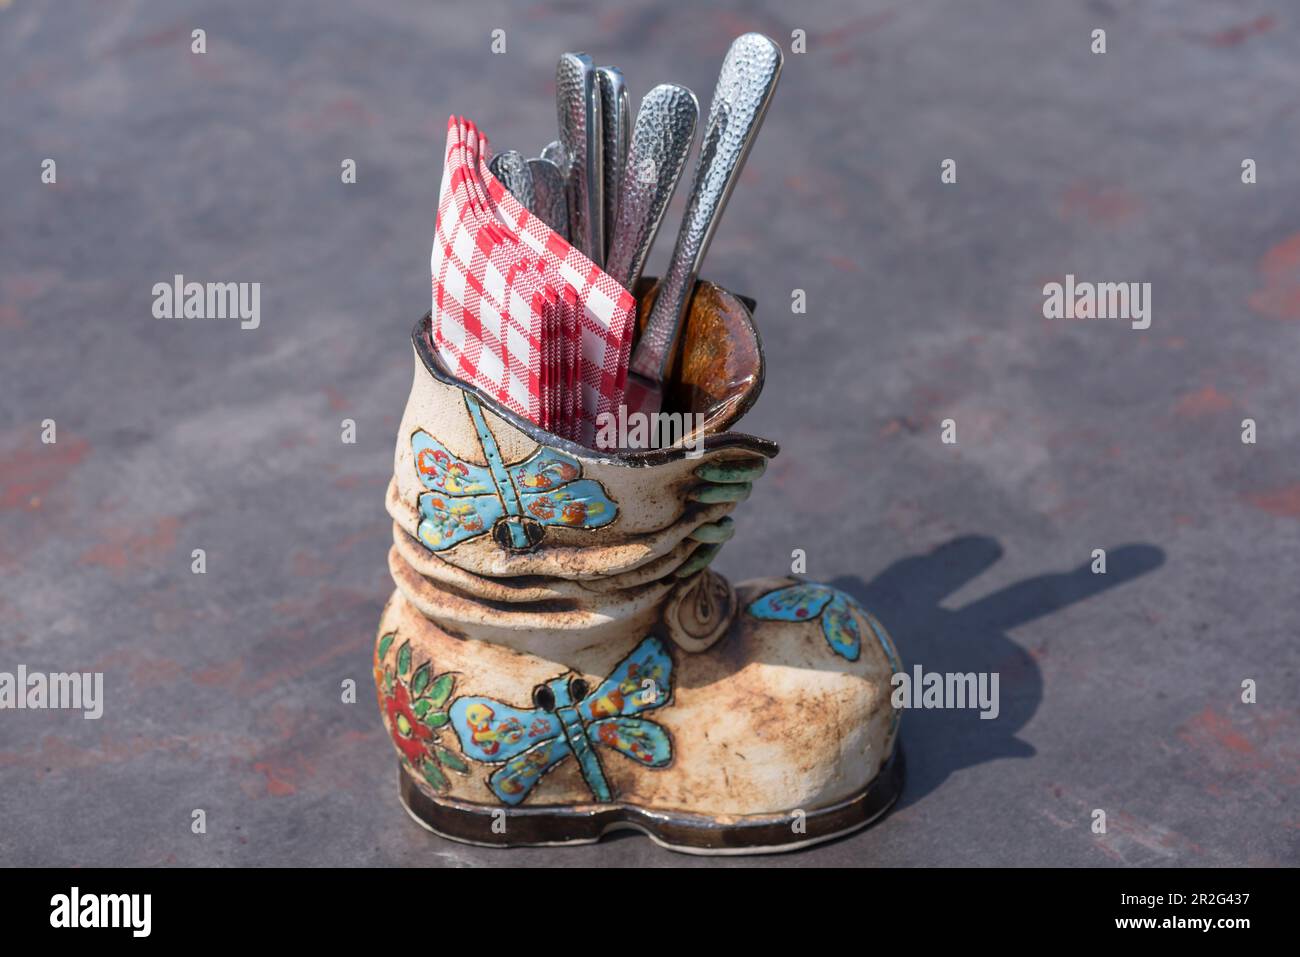 Ceramic boots as cutlery and napkin holder in a restaurant, Lahr, Baden-Wuerttemberg, Germany Stock Photo